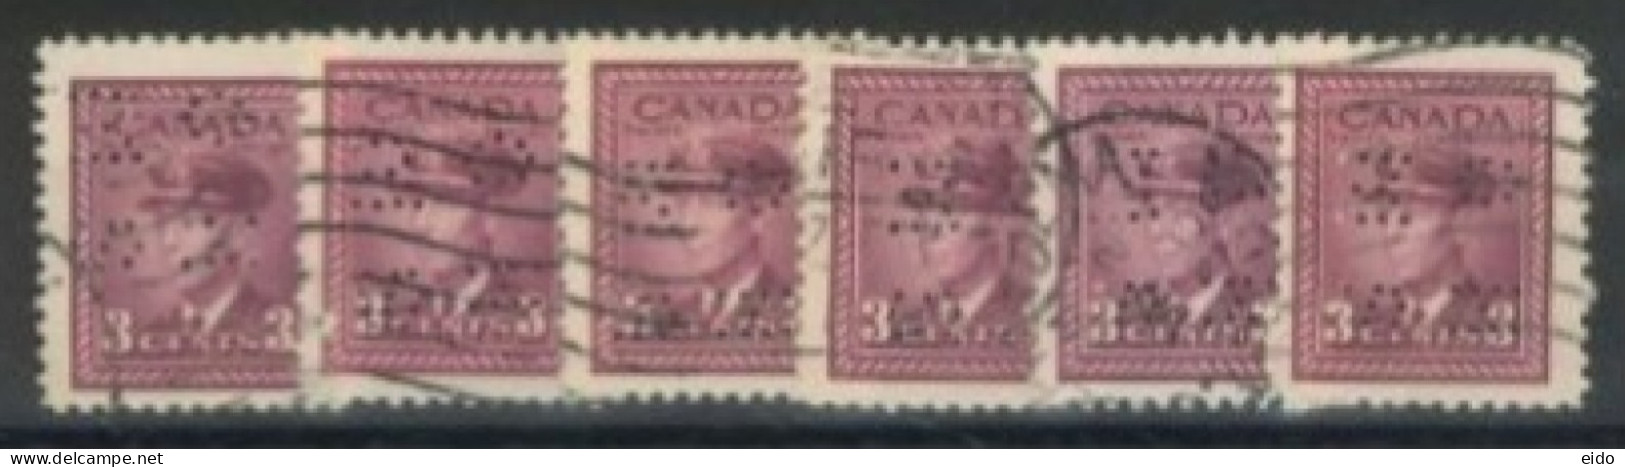 CANADA - 1942, KING GEORGE VI IN NAVAL UNIFORM STAMPS QTY. OF 6, WITH REDUCED SPECIAL PRICE, USED. - Used Stamps